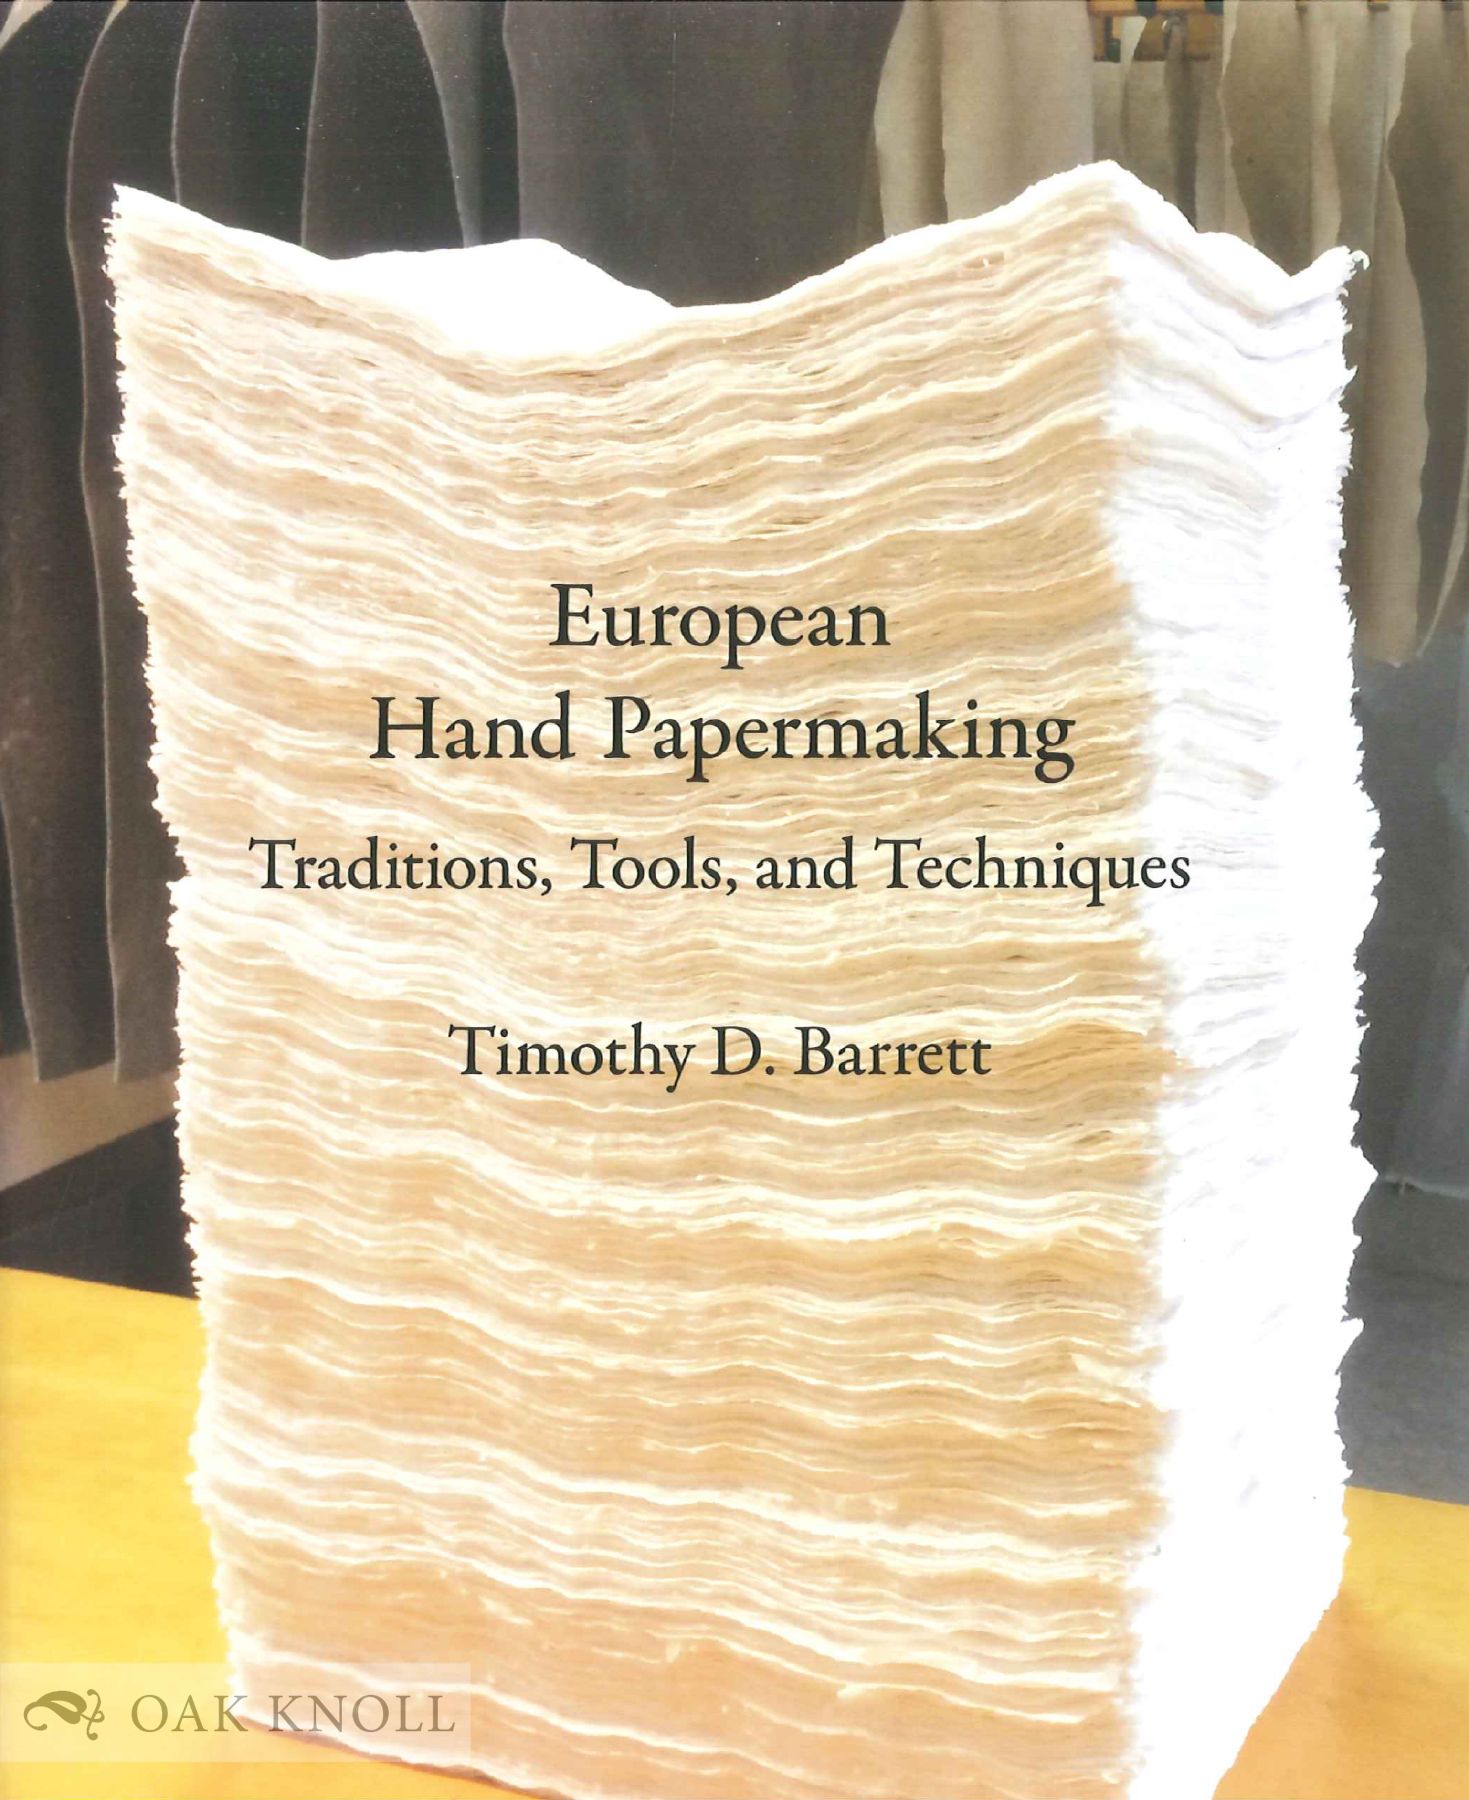 Timothy Moore, Papermaking Champion — North American Hand Papermakers